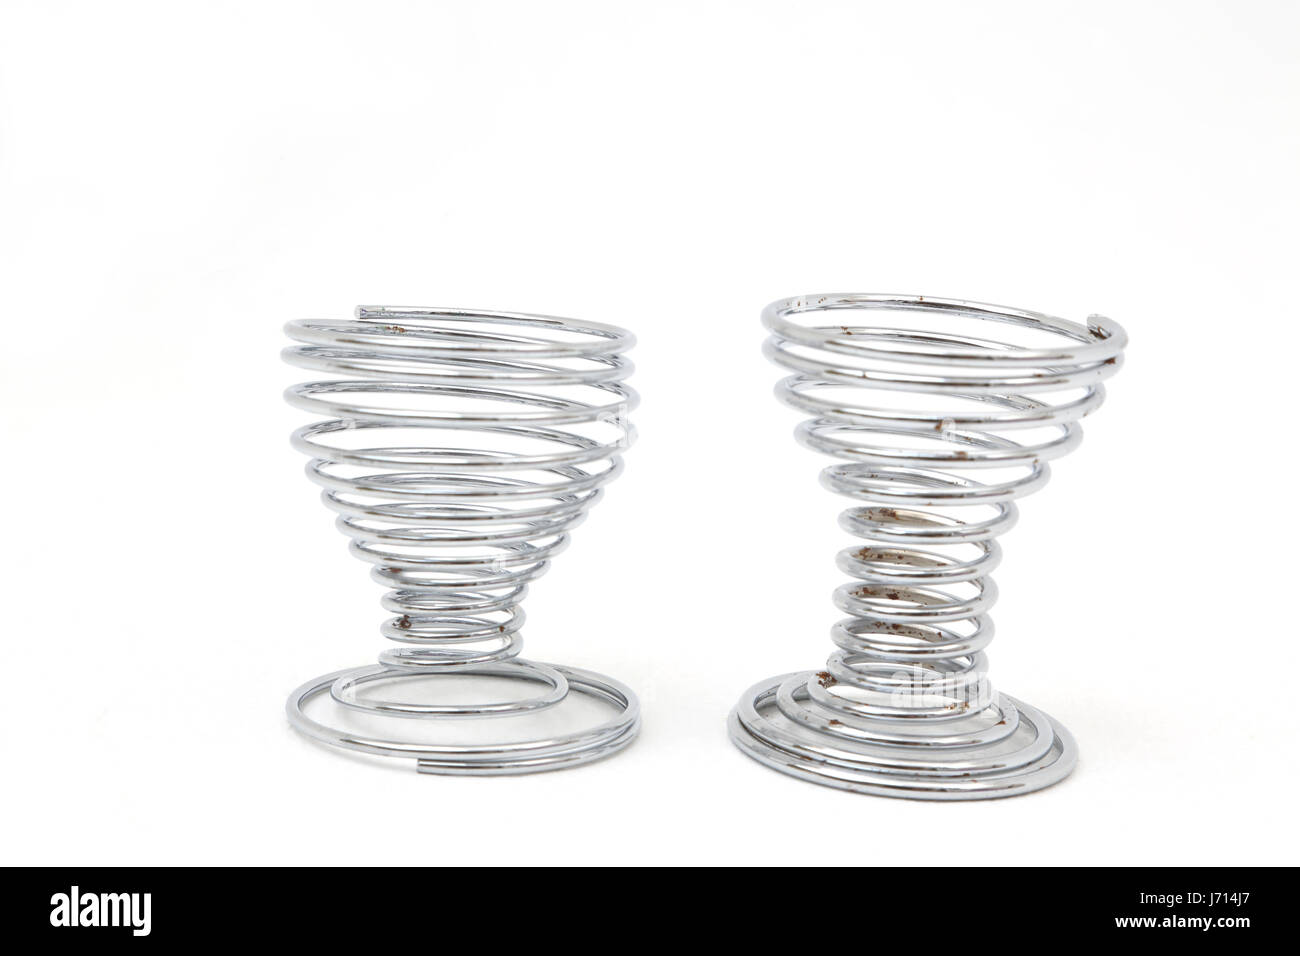 Two Coiled Metal Egg Cups Stock Photo